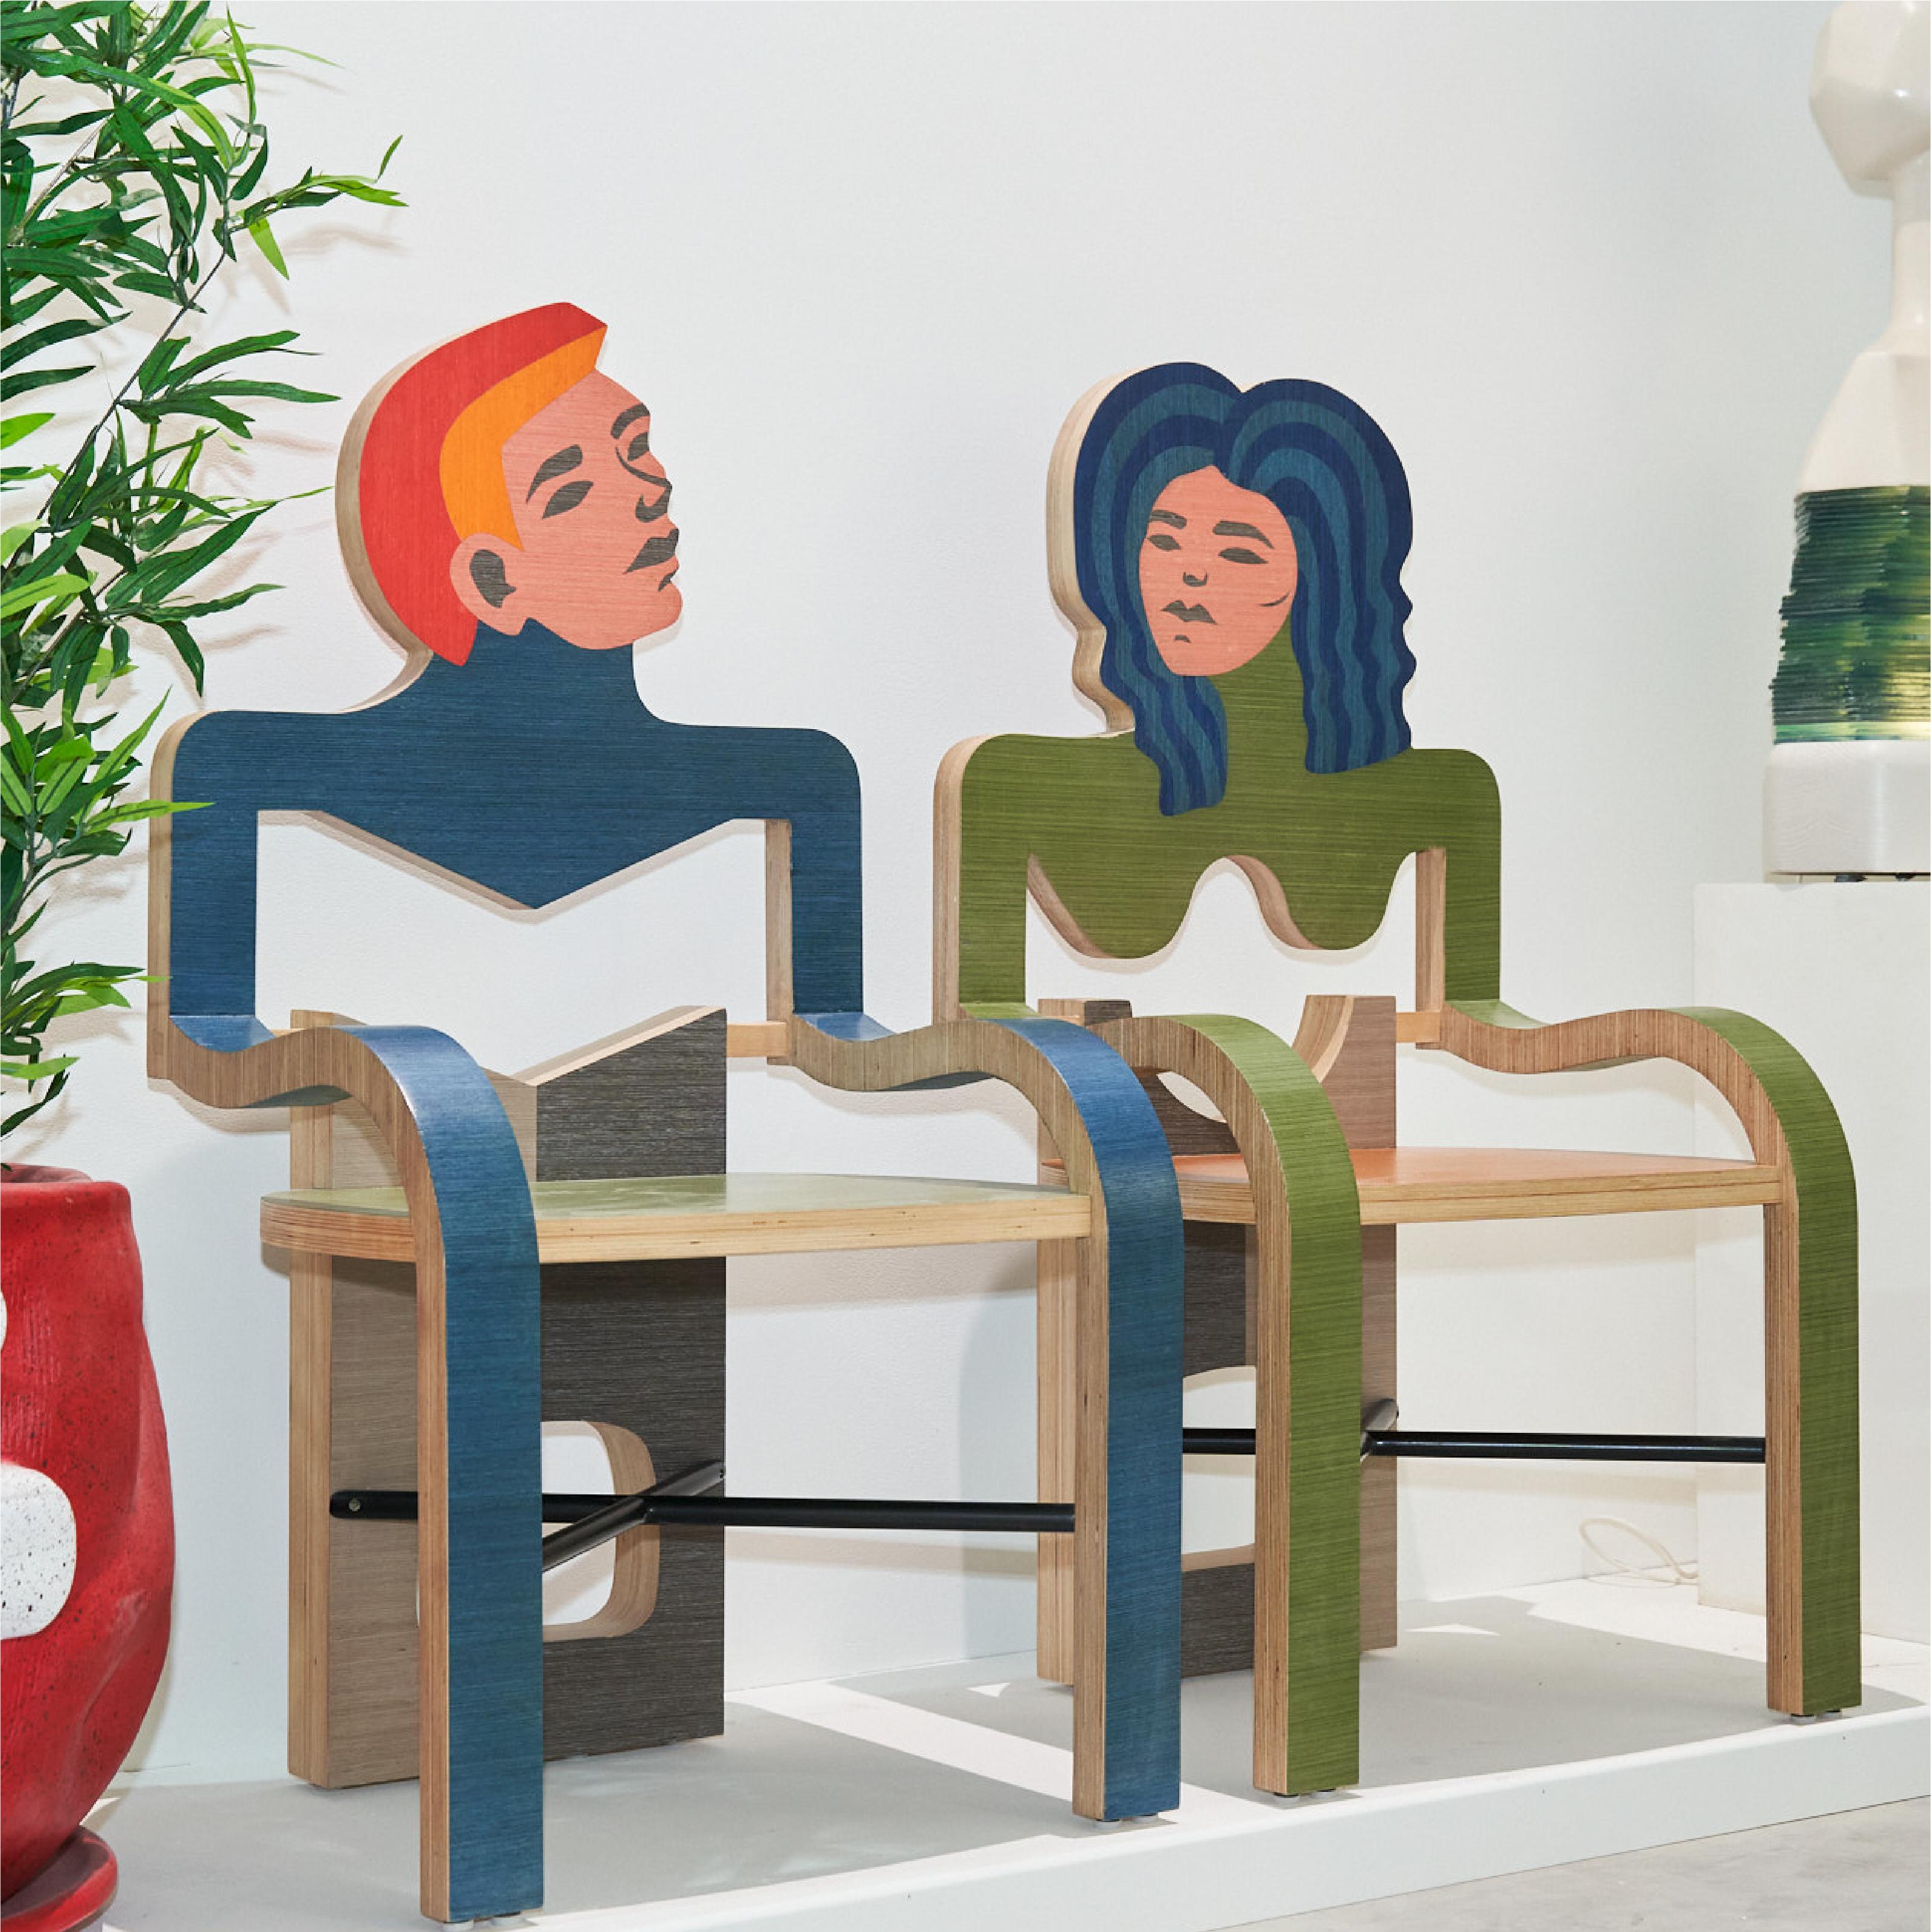 Wood and multicolor veneer
Dimensions: 57Wx49Dx113H cm

The “Promise” chairs were created with the thought of ‘ever after’. crafted to remain together they interrupt the modern hopelessness of romance and suggest instead an almost fairytale moment